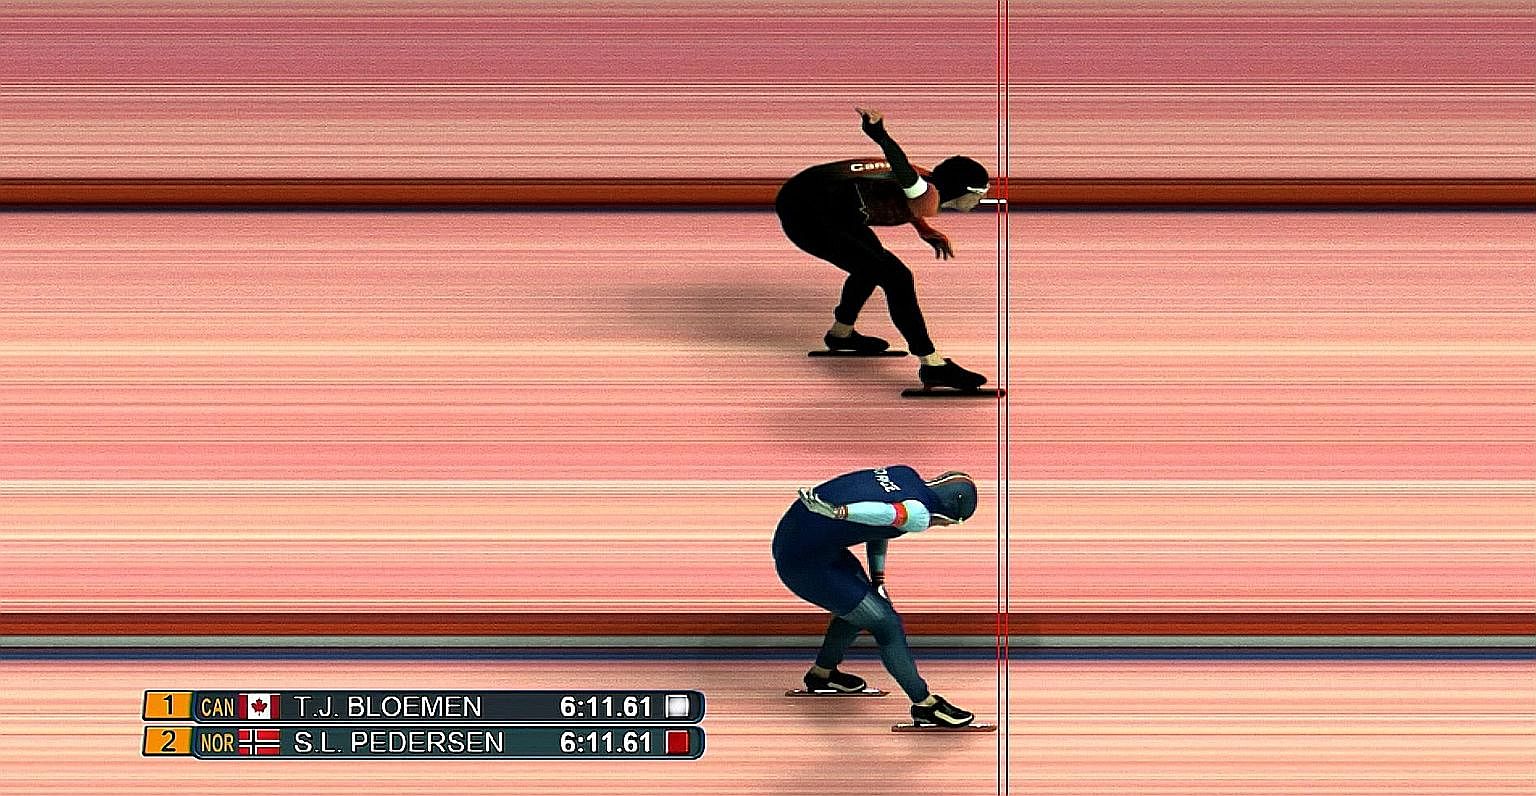 A screen grab of a television replay showing the blade of Canada's Ted-Jan Bloemen crossing the line two-thousandths of a second ahead of Norway's Sverre Lunde Pedersen.